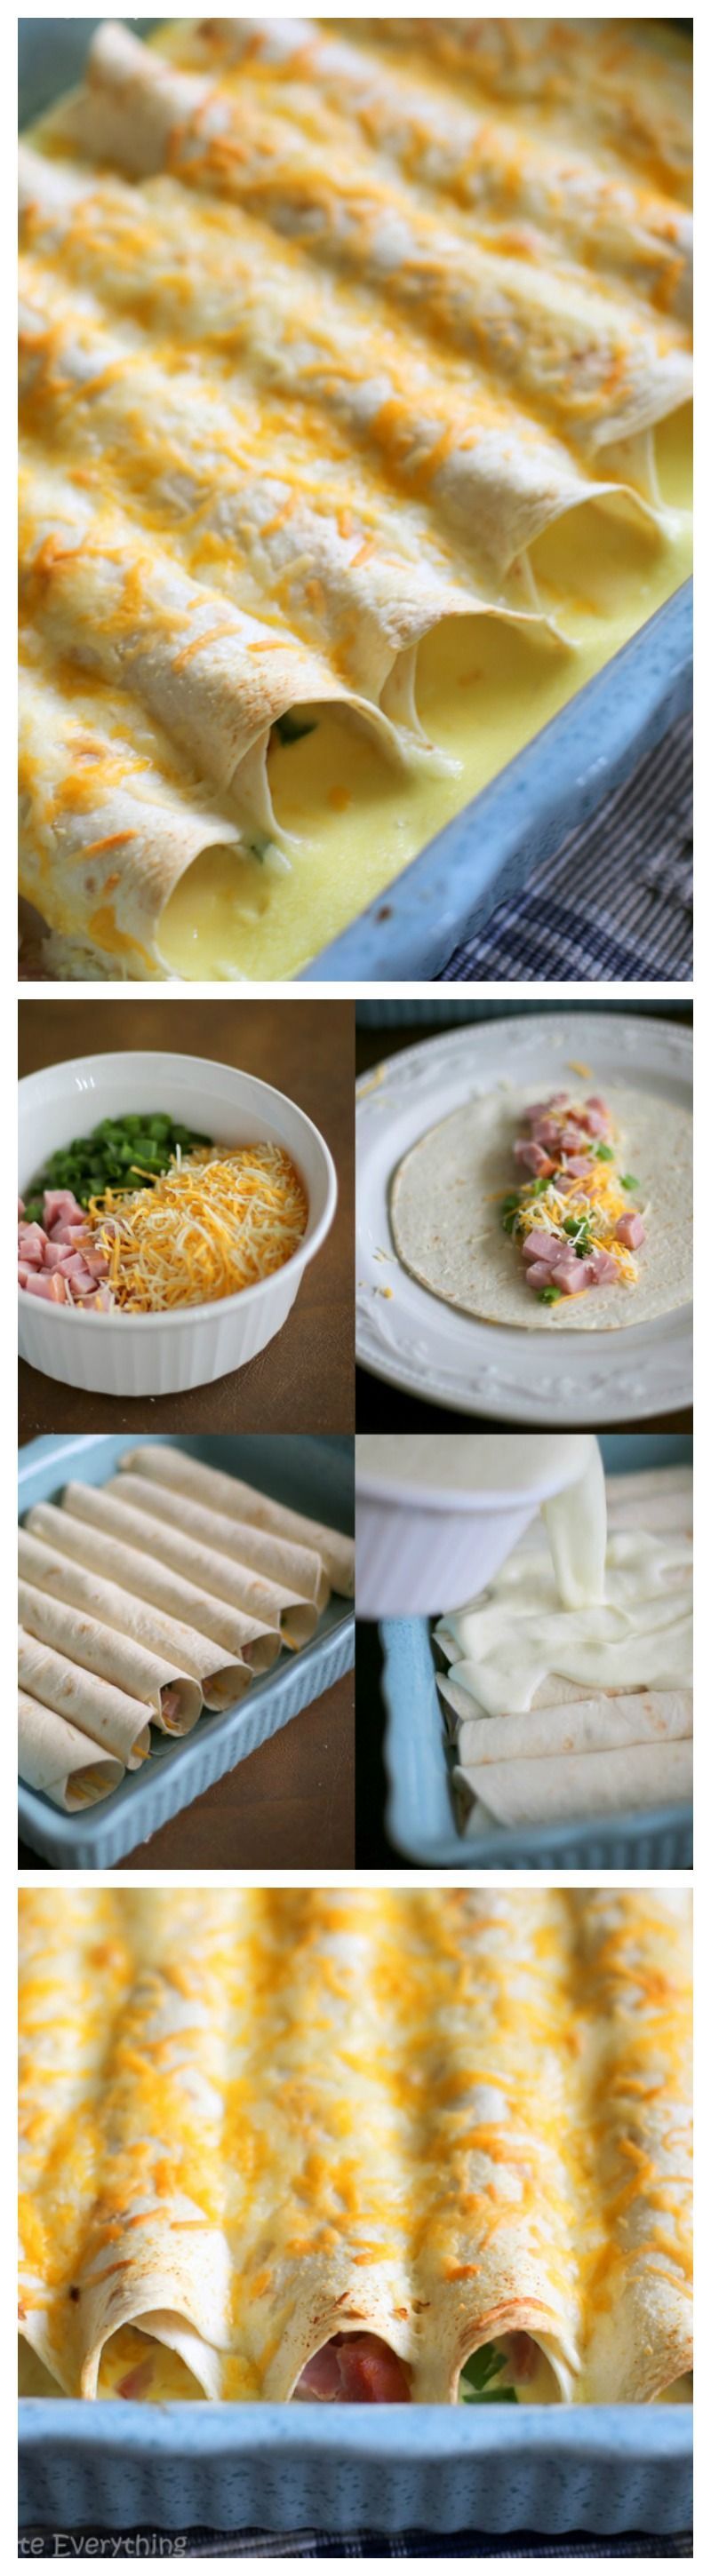 Breakfast!  — “Ham and Cheese Breakfast Enchiladas – prepared the night before and filled with a ham and cheese egg mixture.